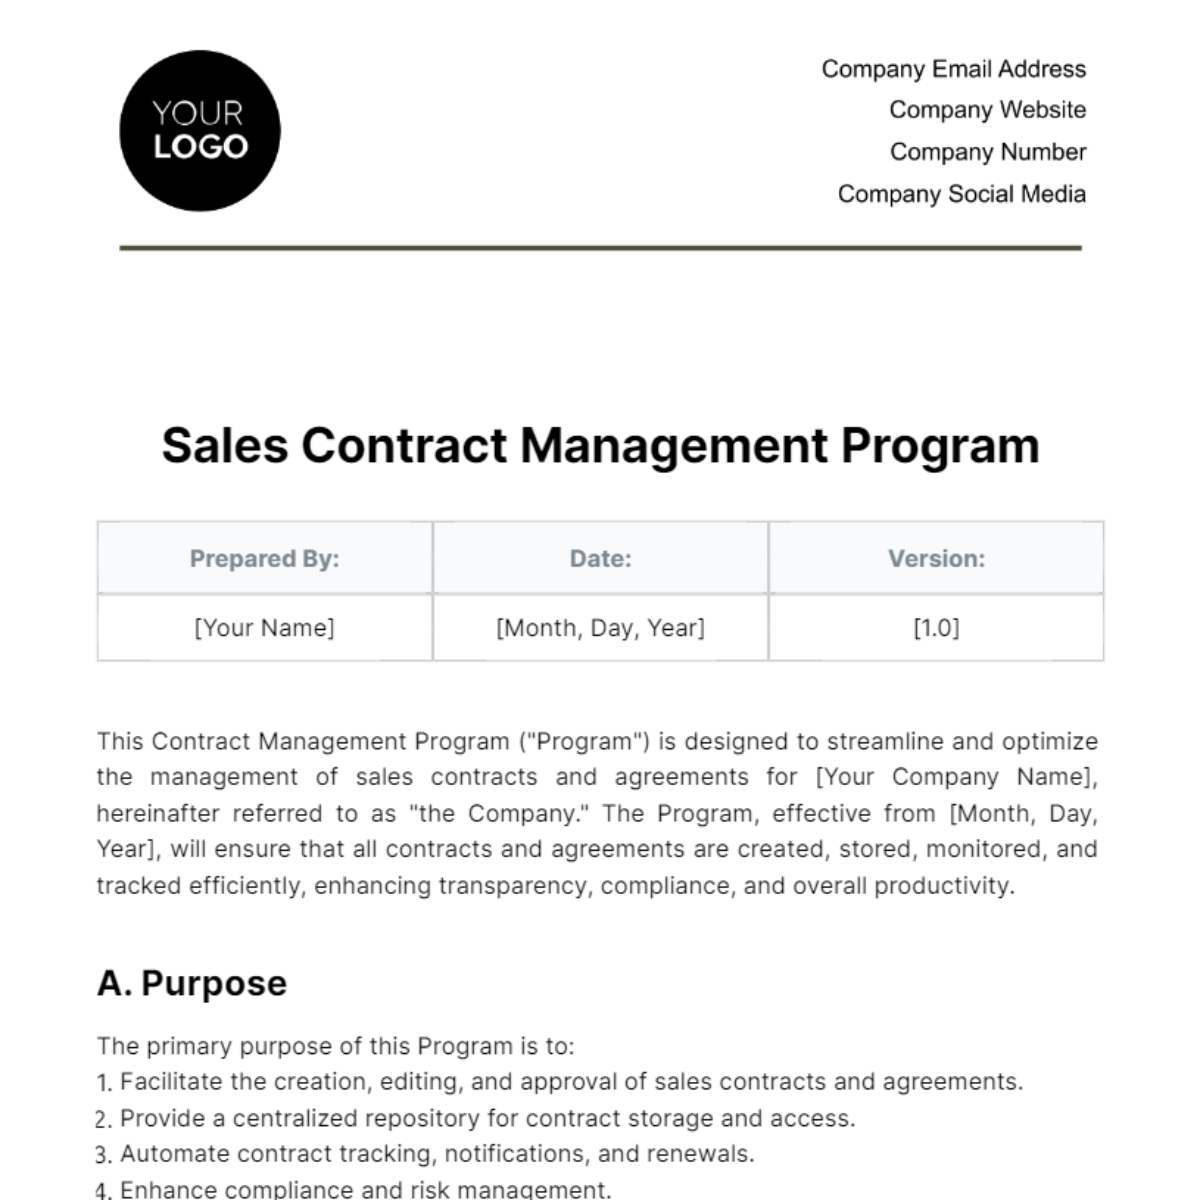 Free Sales Contract Management Program Template